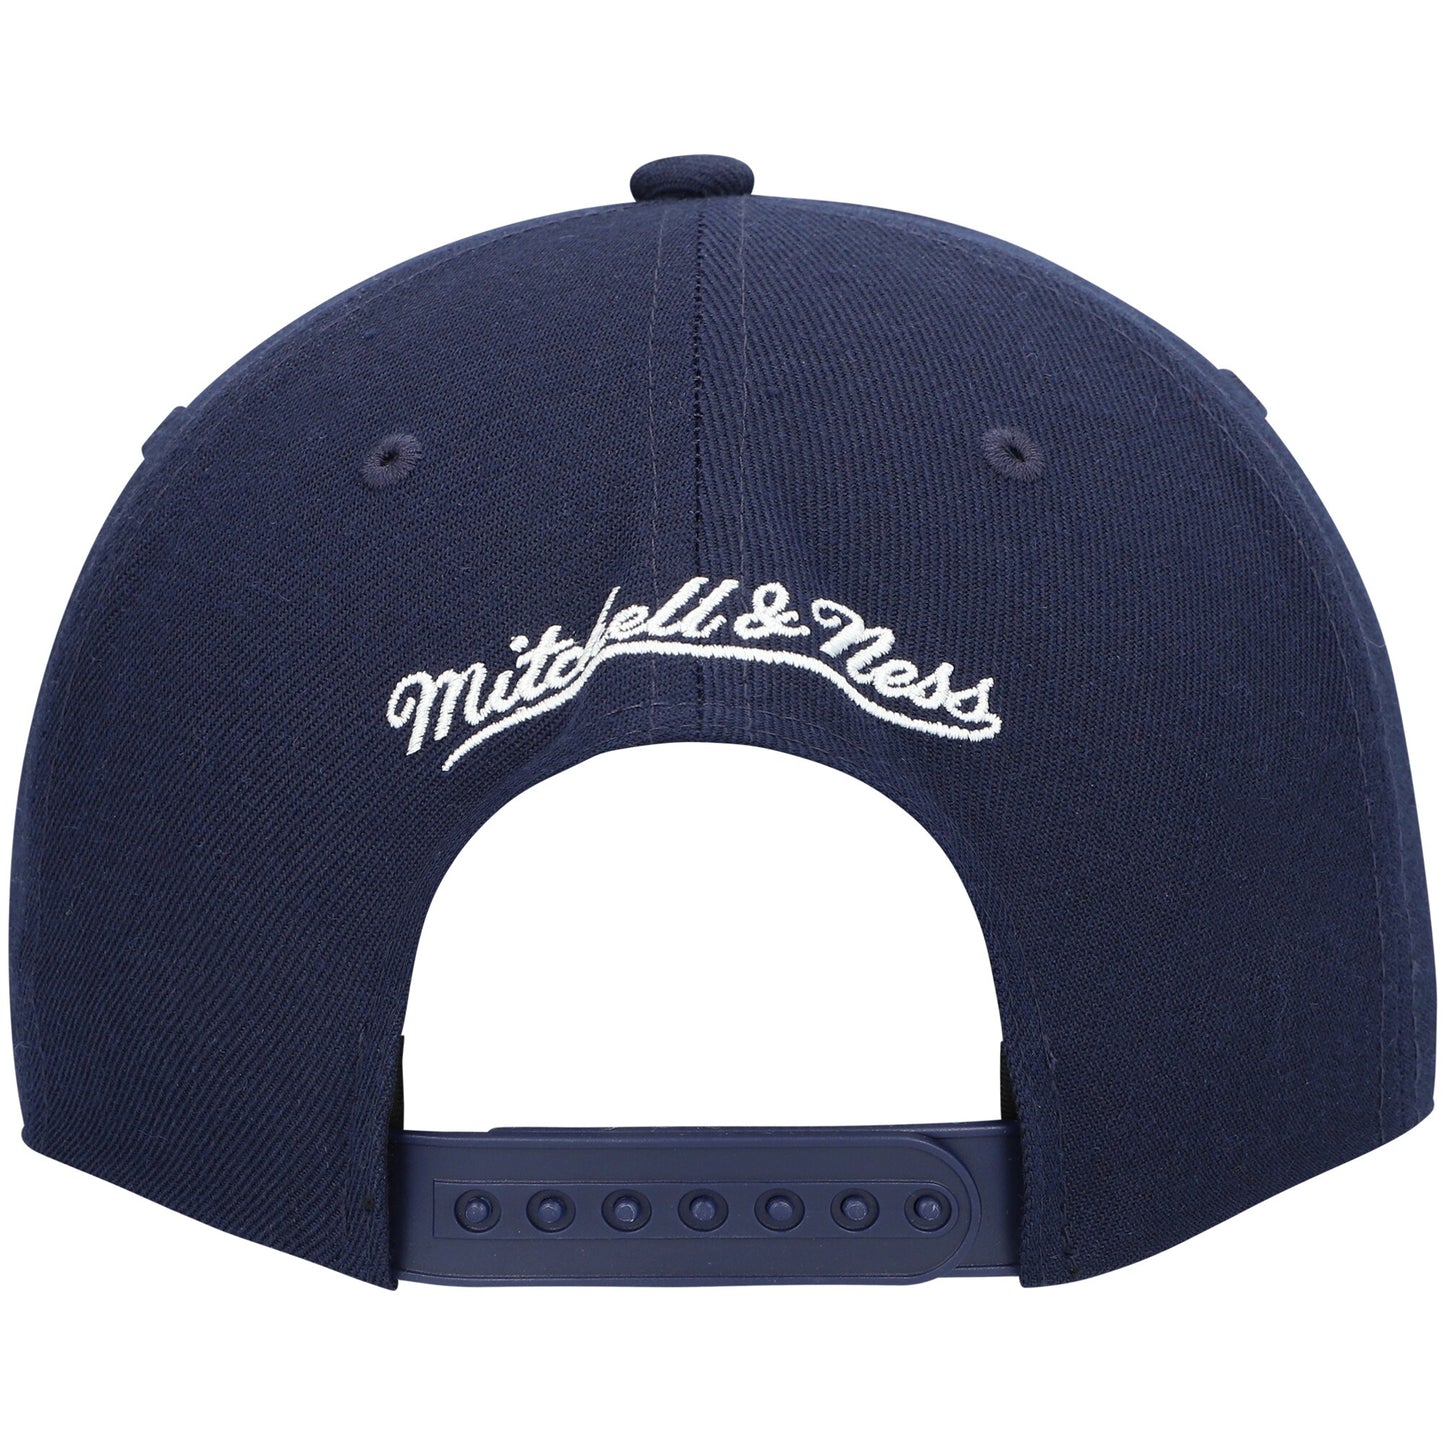 Mens NBA Memphis Grizzlies Navy Team Ground 2.0 Snapback Hat By Mitchell And Ness